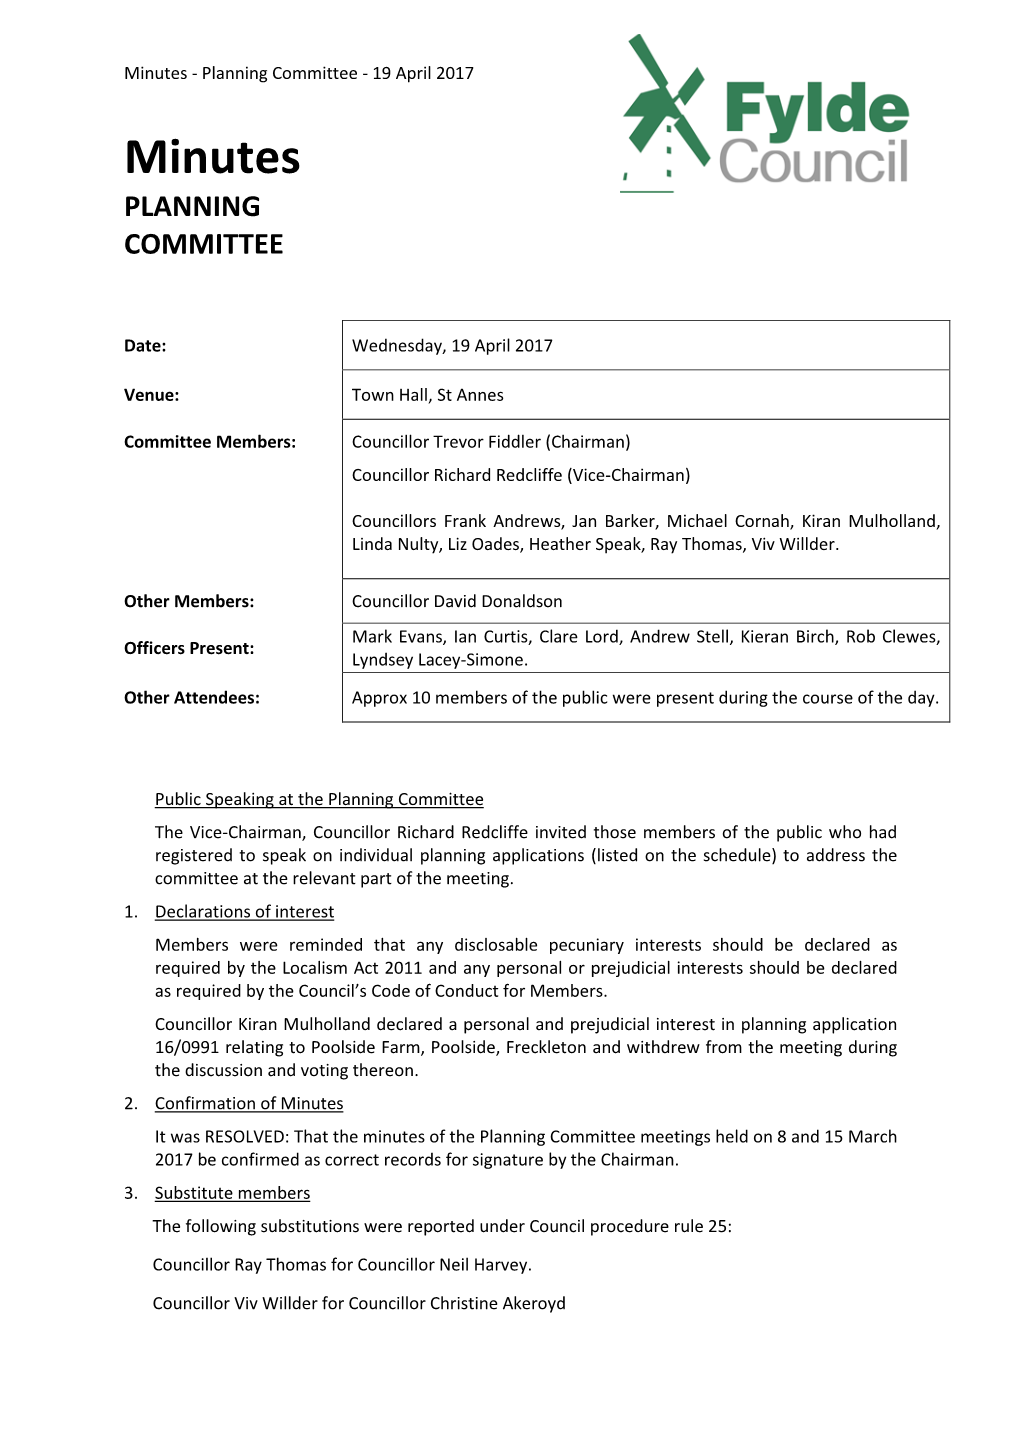 Minutes - Planning Committee - 19 April 2017